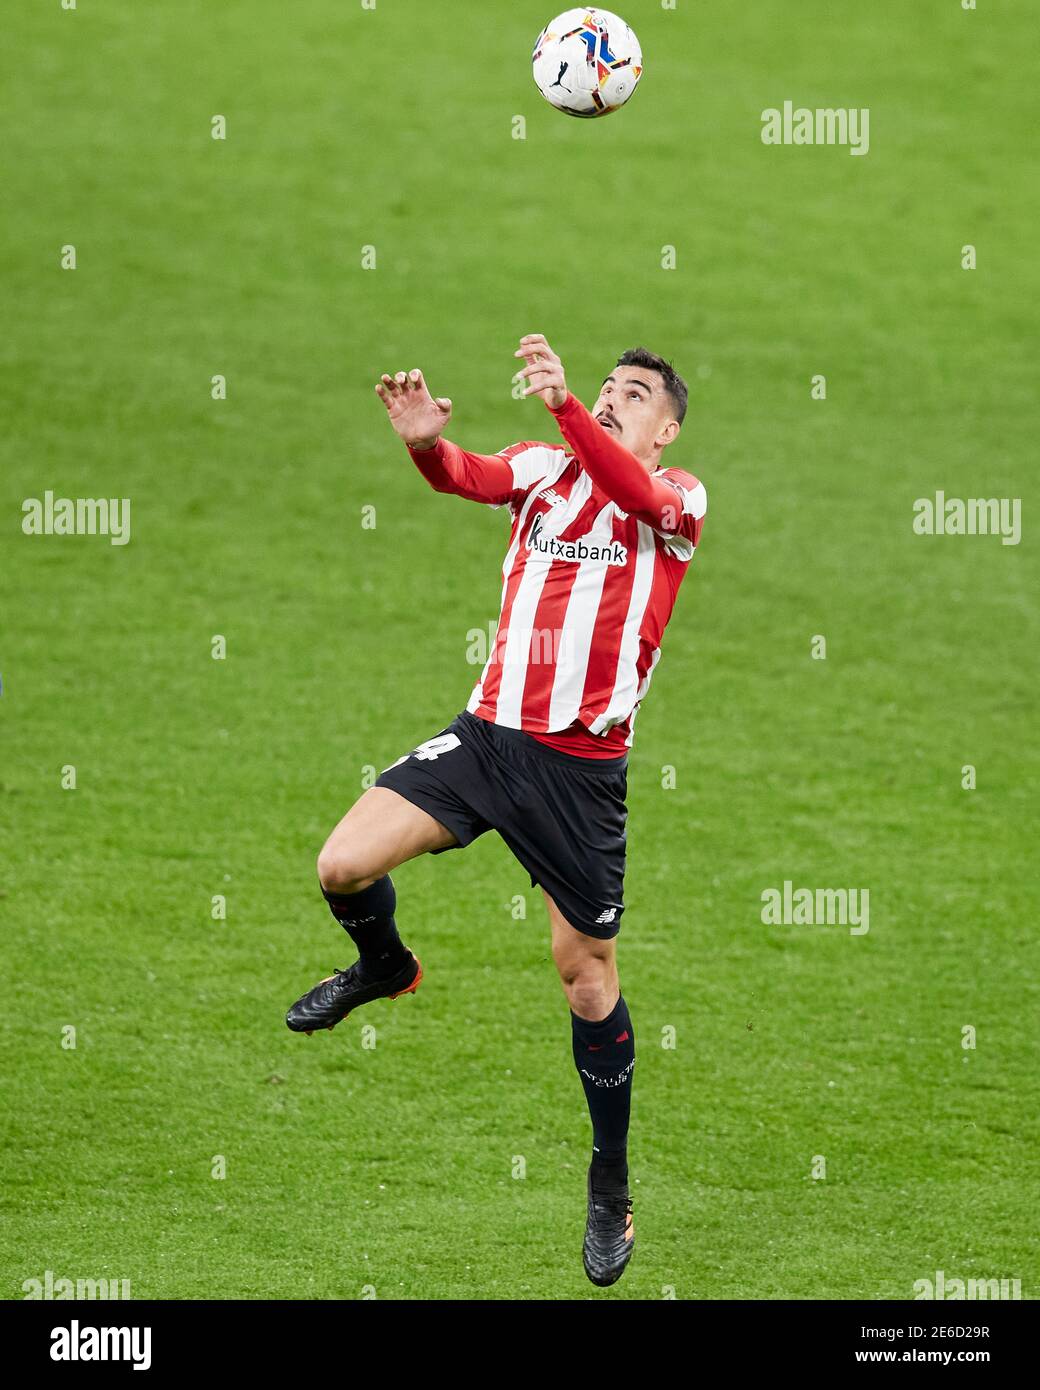 Bilbao, Spain. 25 January, 2021. Dani Garcia of Athletic Club in action during the La Liga match between Athletic Club Bilbao and Getafe FC played at Stock Photo